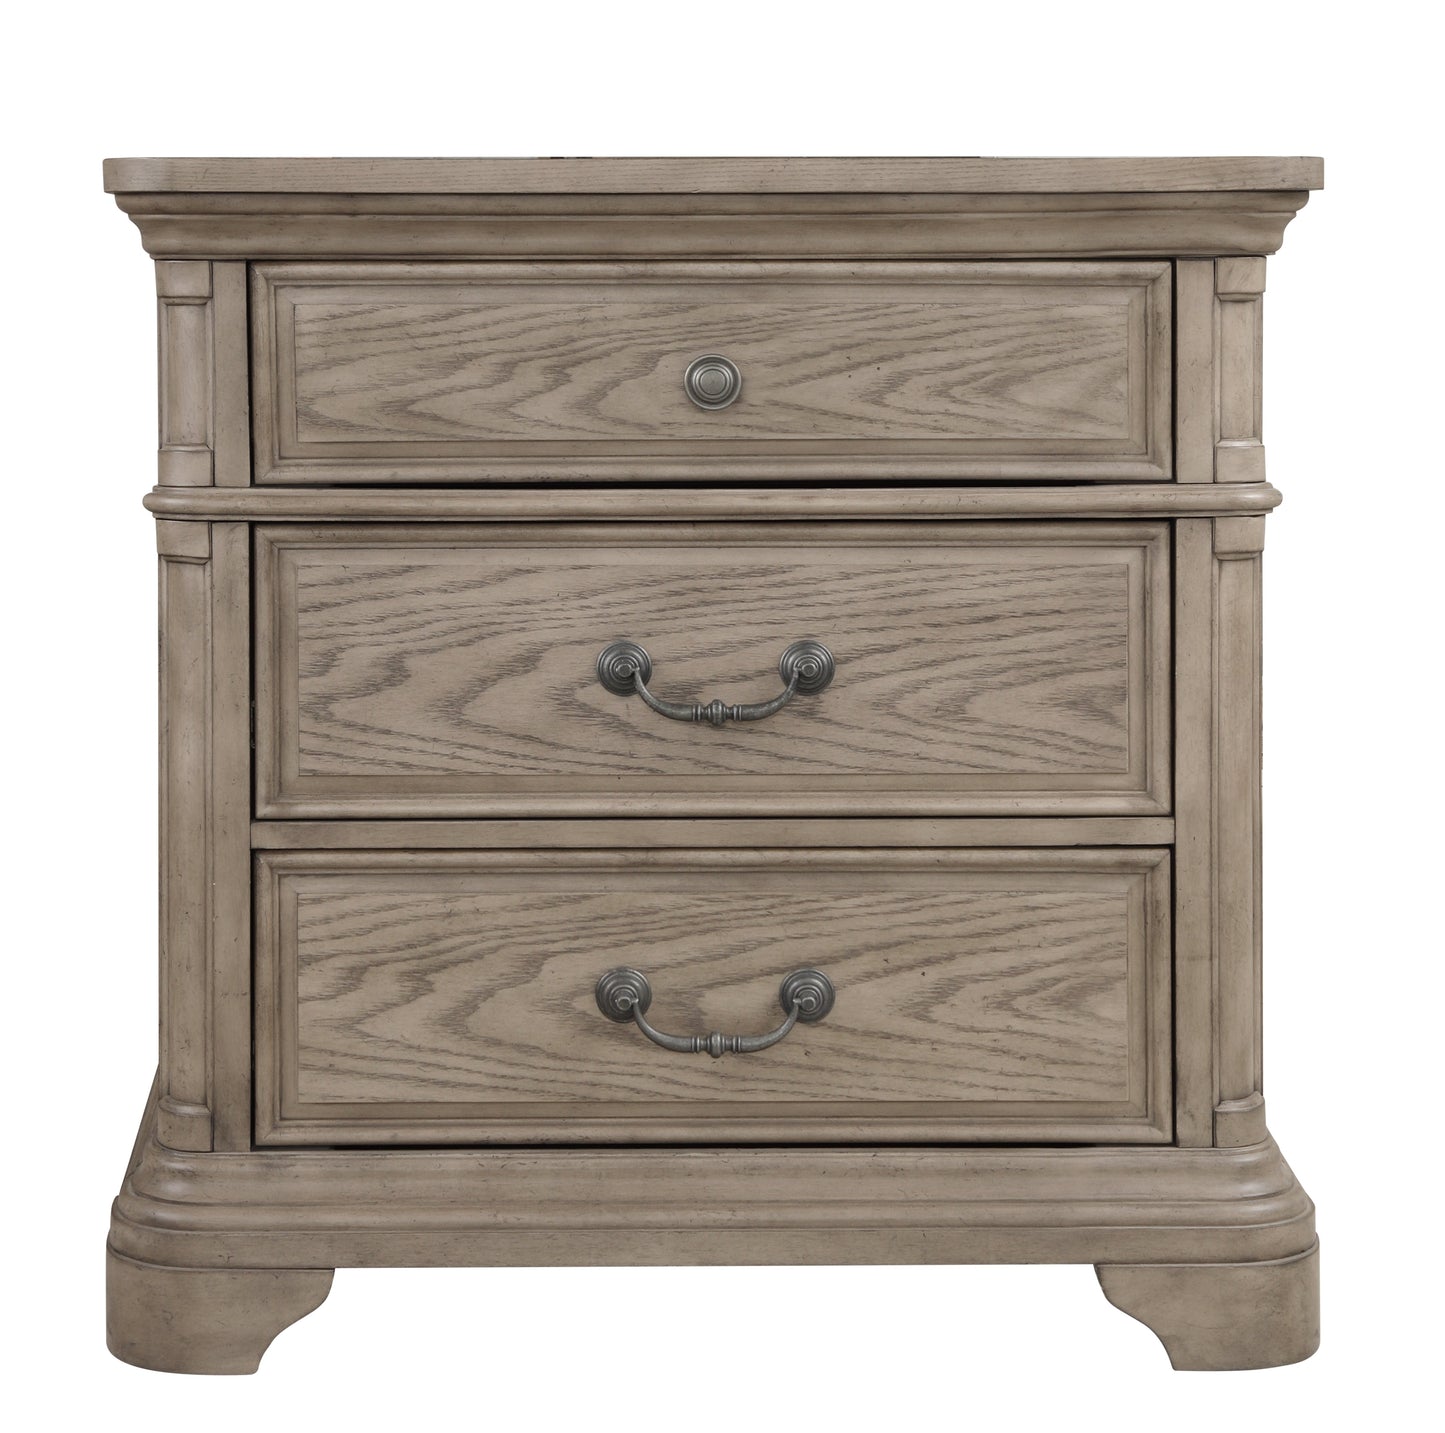 Levan 3-Drawer Wood Nightstand in Light Gray with USB Outlet